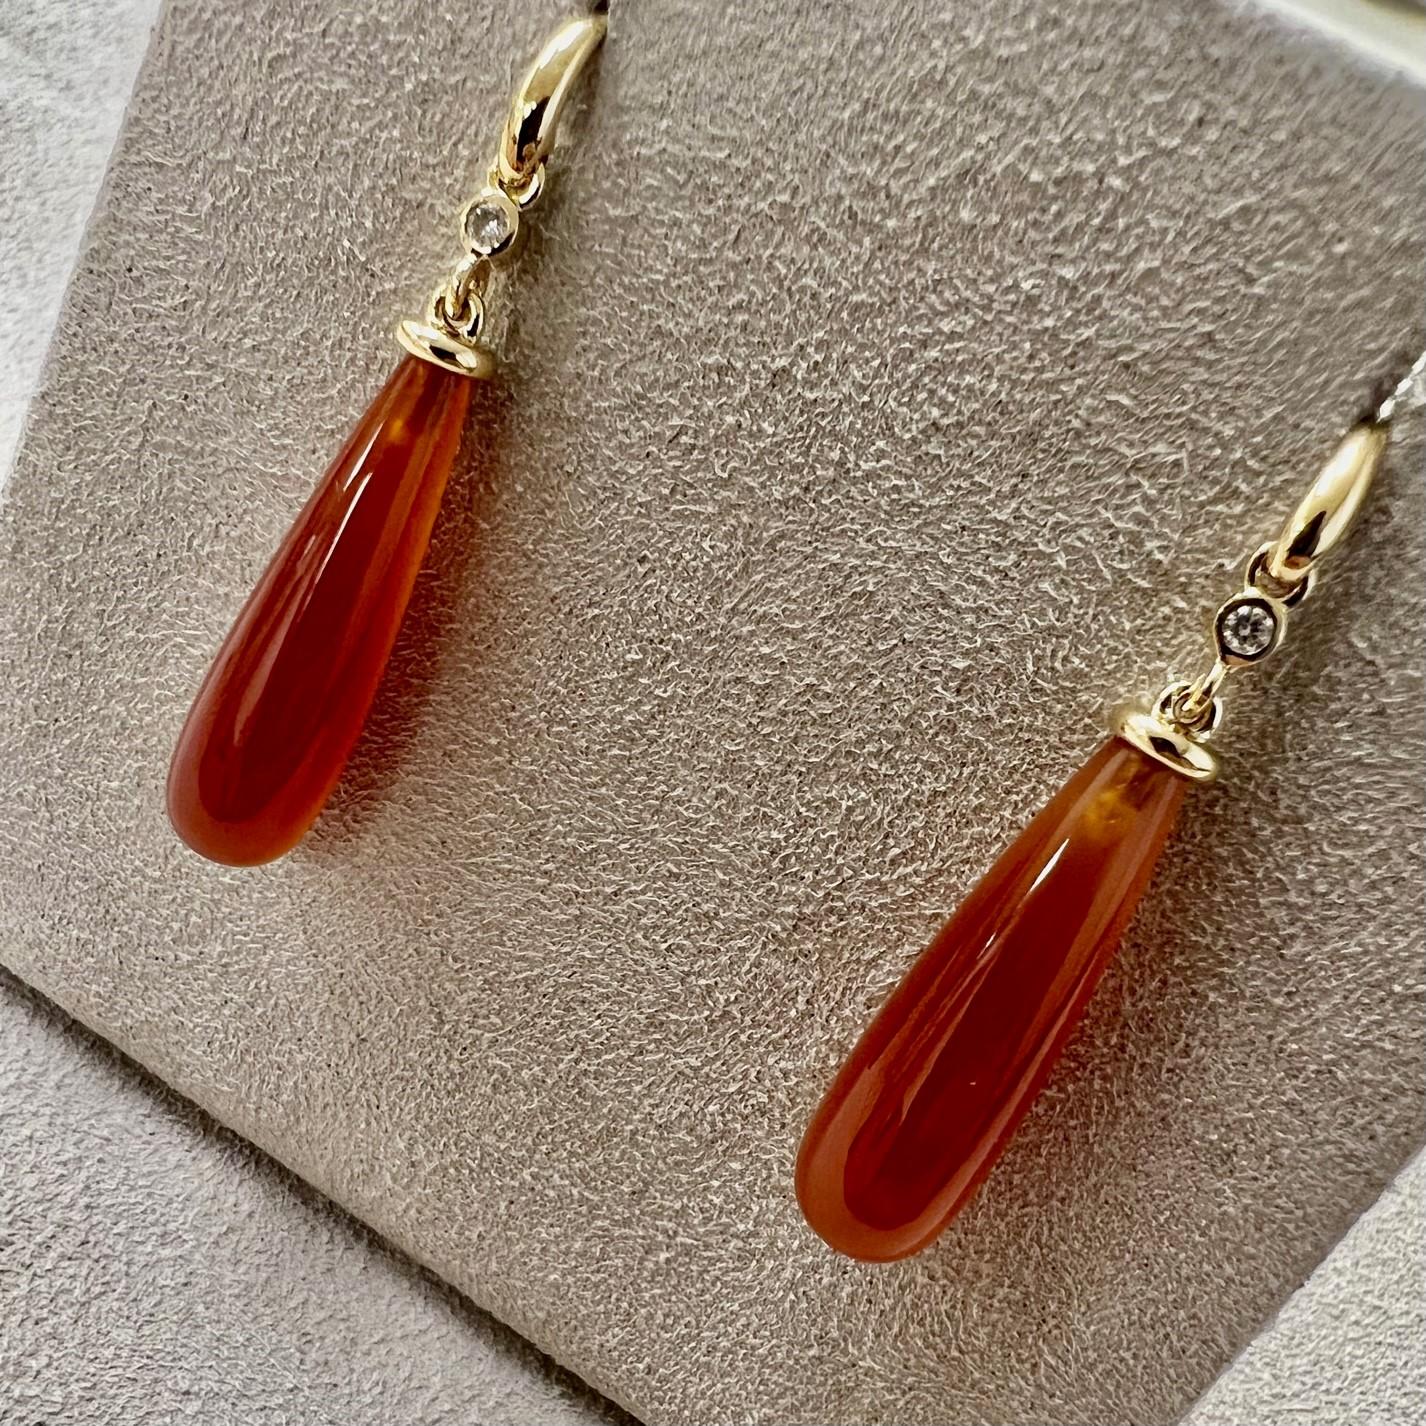 Created in 18 karat yellow gold
Orange chalcedony drops 17 carats approx.
Bright champagne diamonds 0.05 carat approx.
French wire for pierced ears
Limited edition

Intricately crafted from 18 karat yellow gold, these limited edition earrings boast